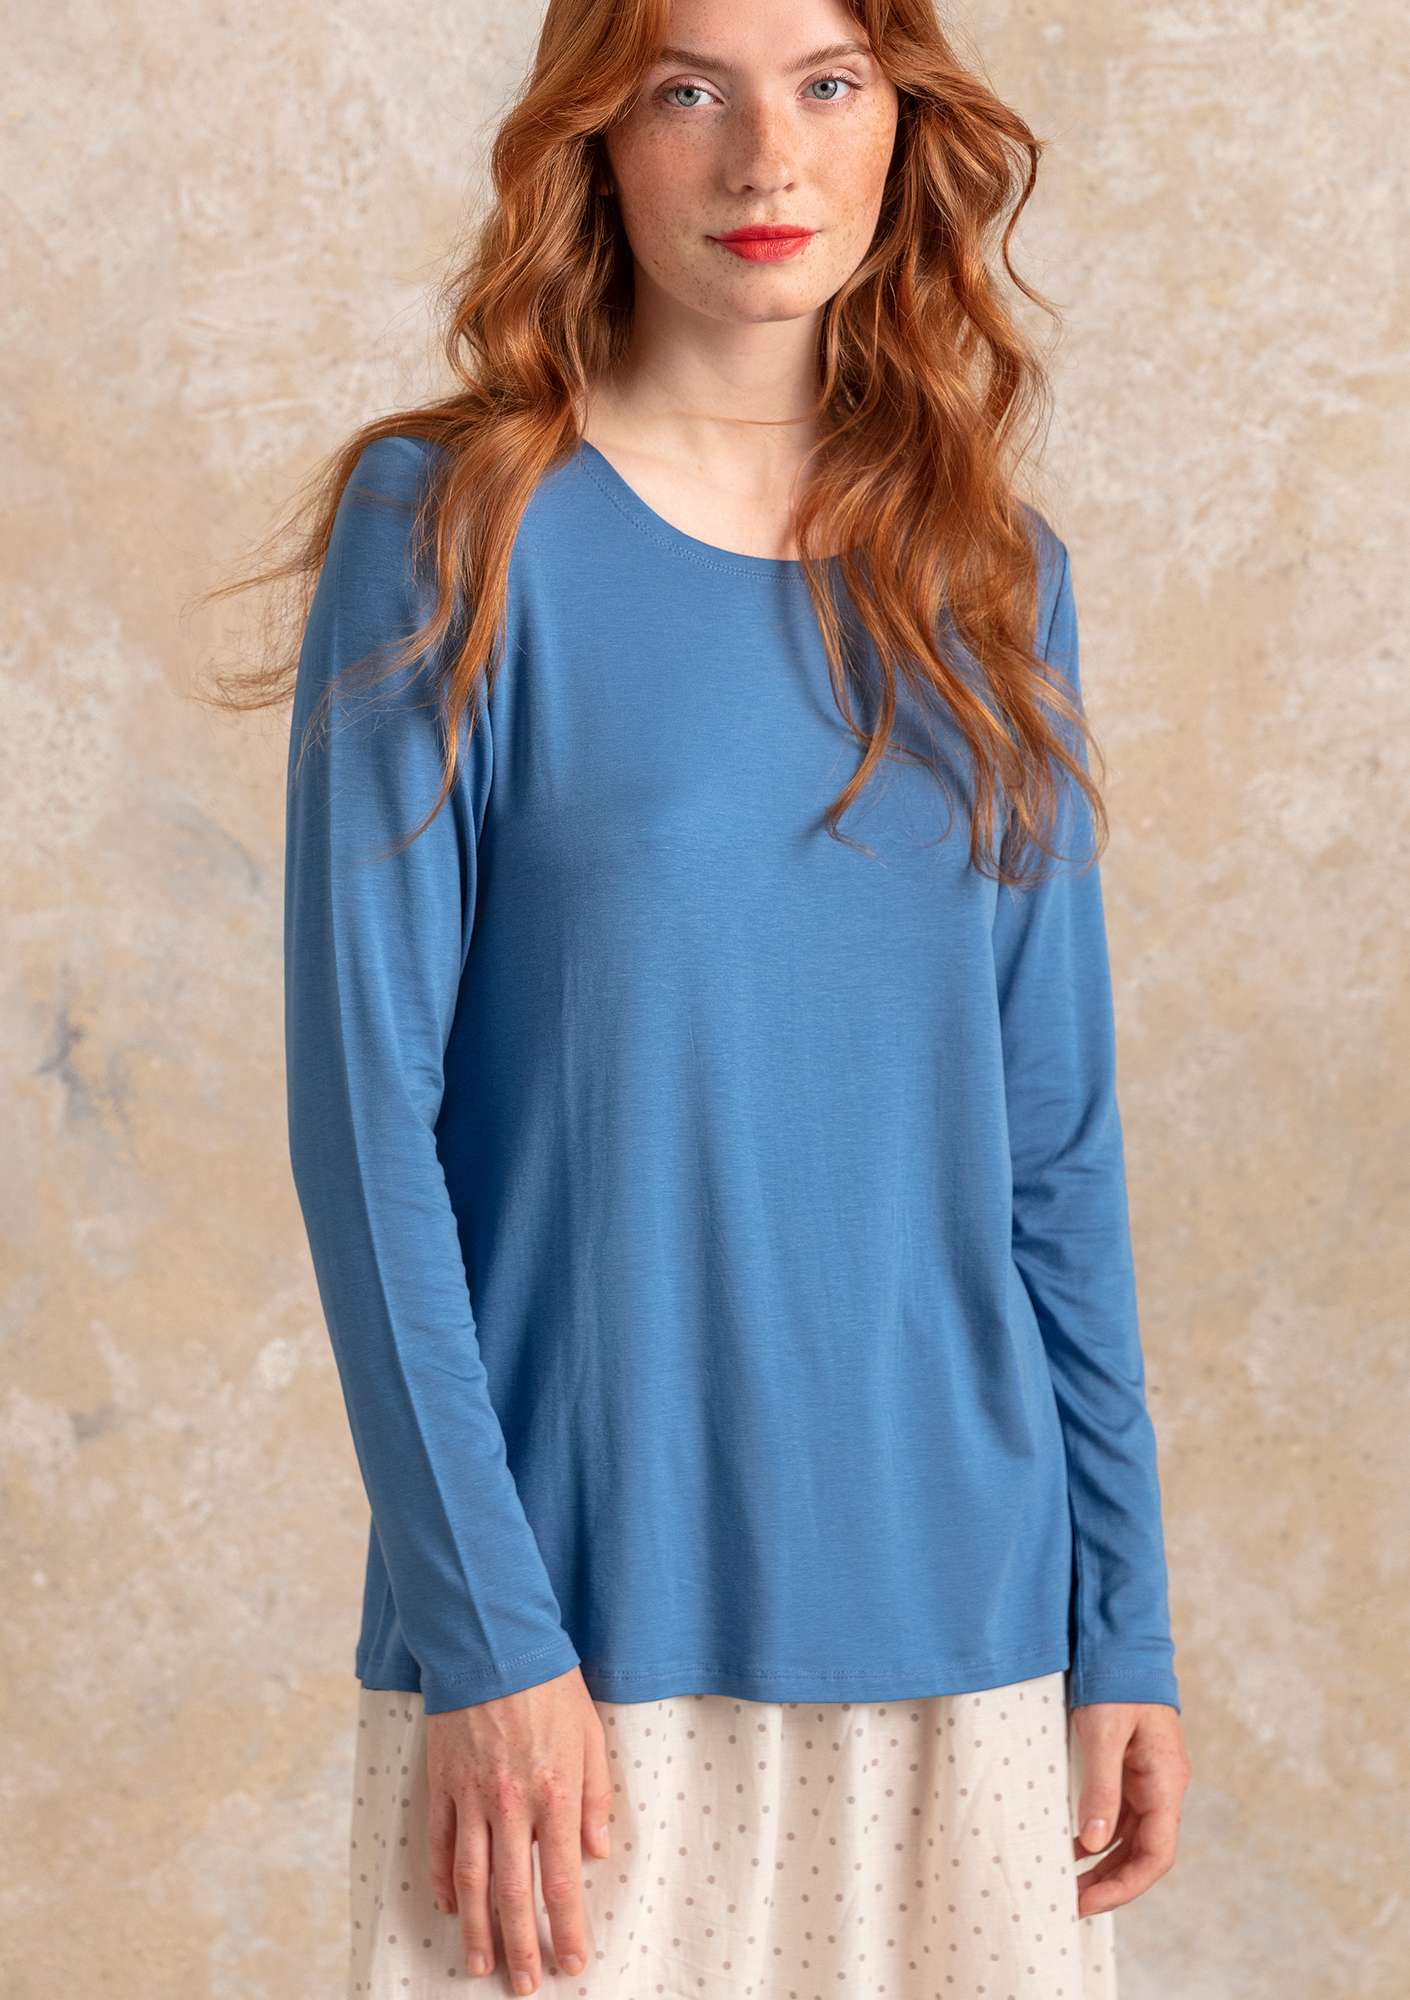 “Adena” jersey top in lyocell/spandex flax blue thumbnail